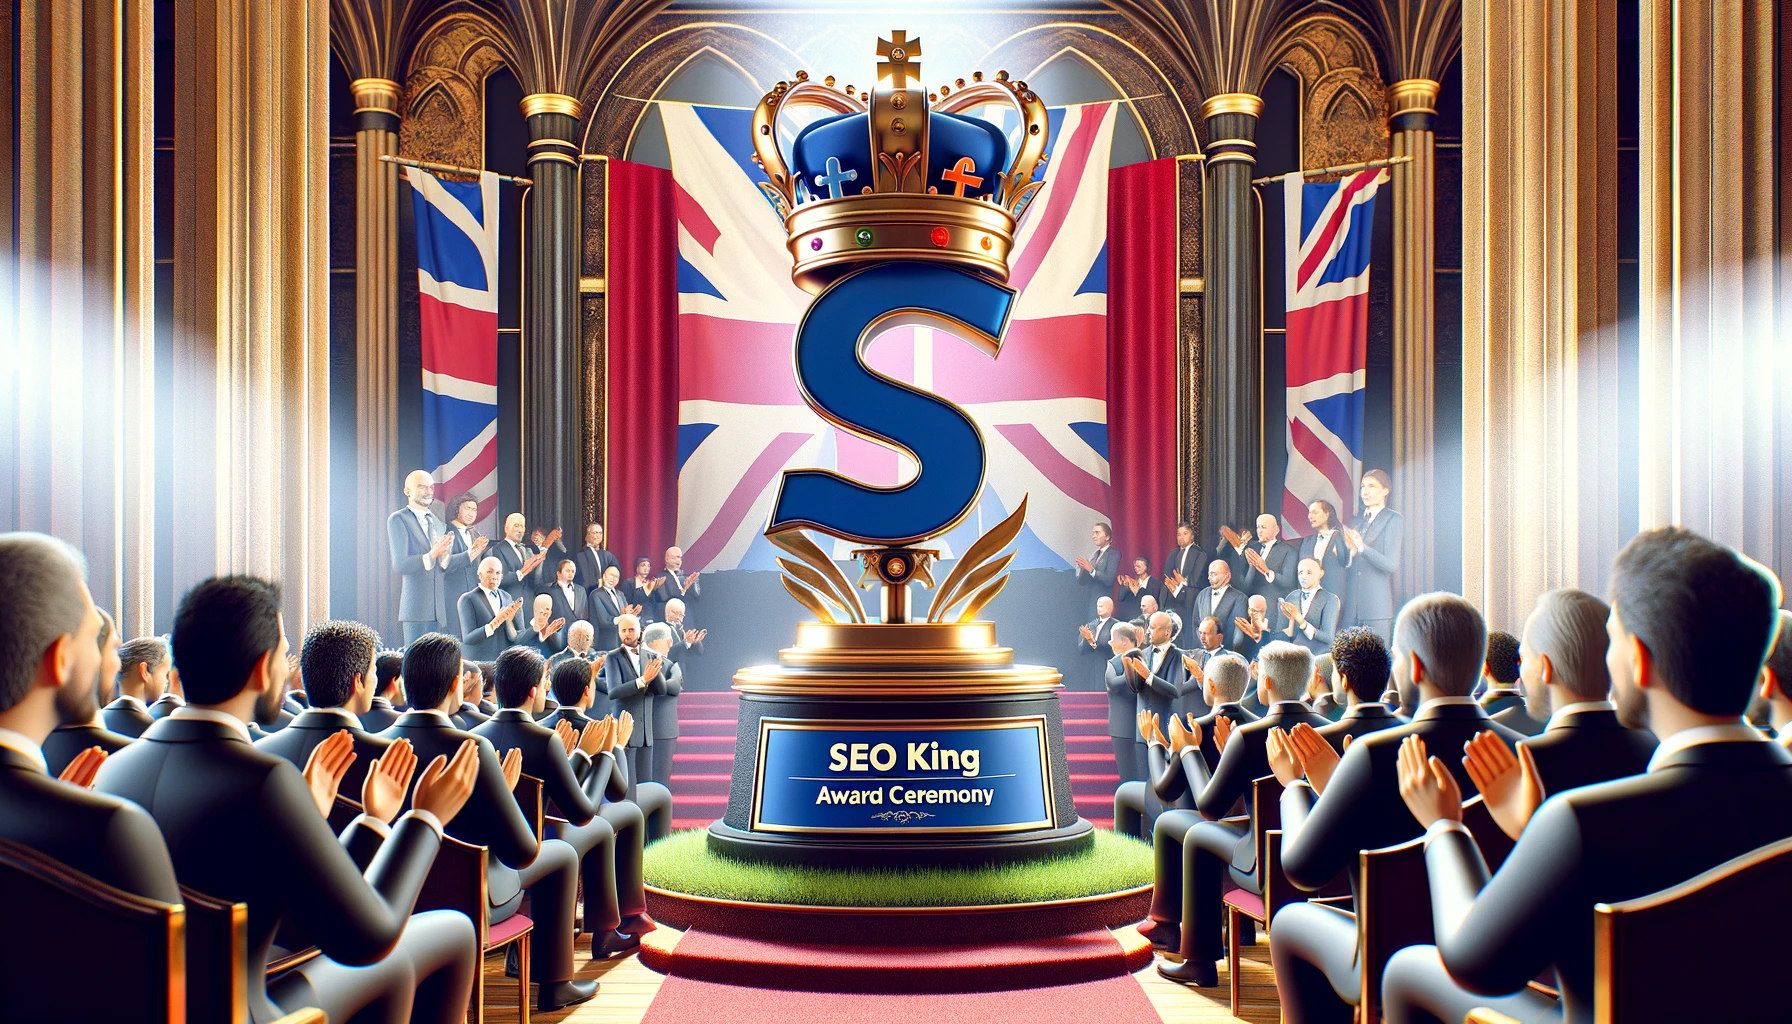 who is known as the seo king